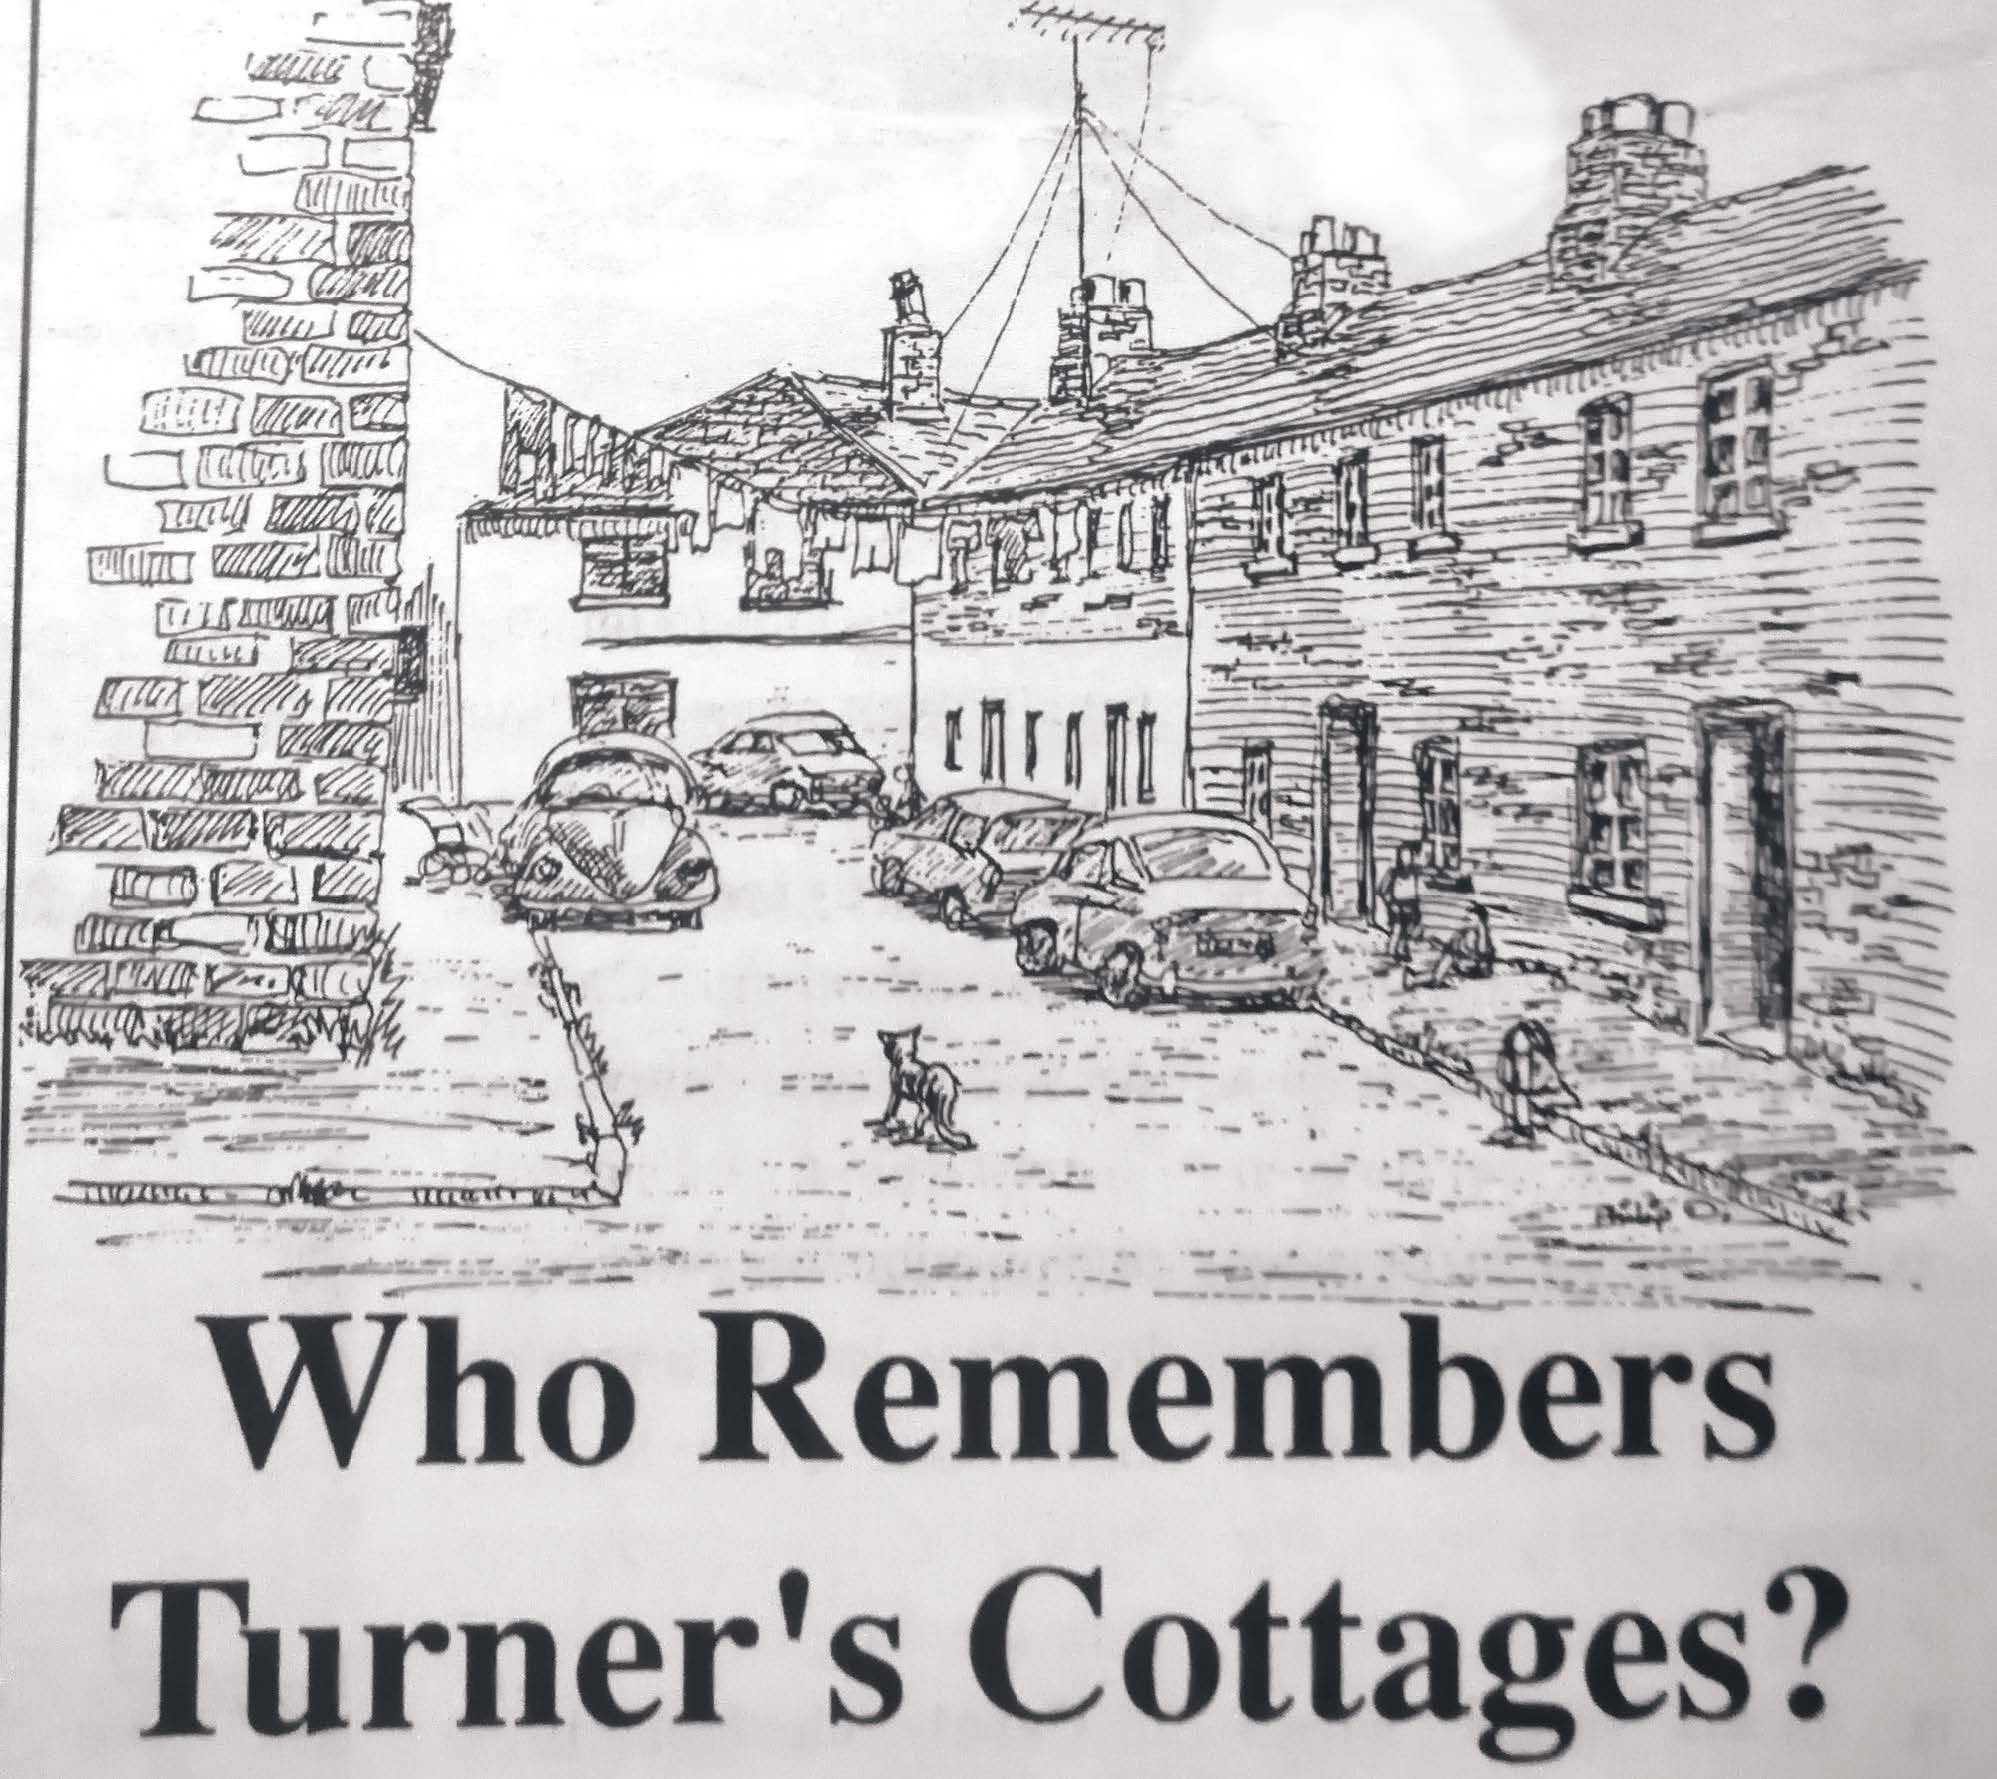 Turner’s Cottages were demolished in the early 1970s